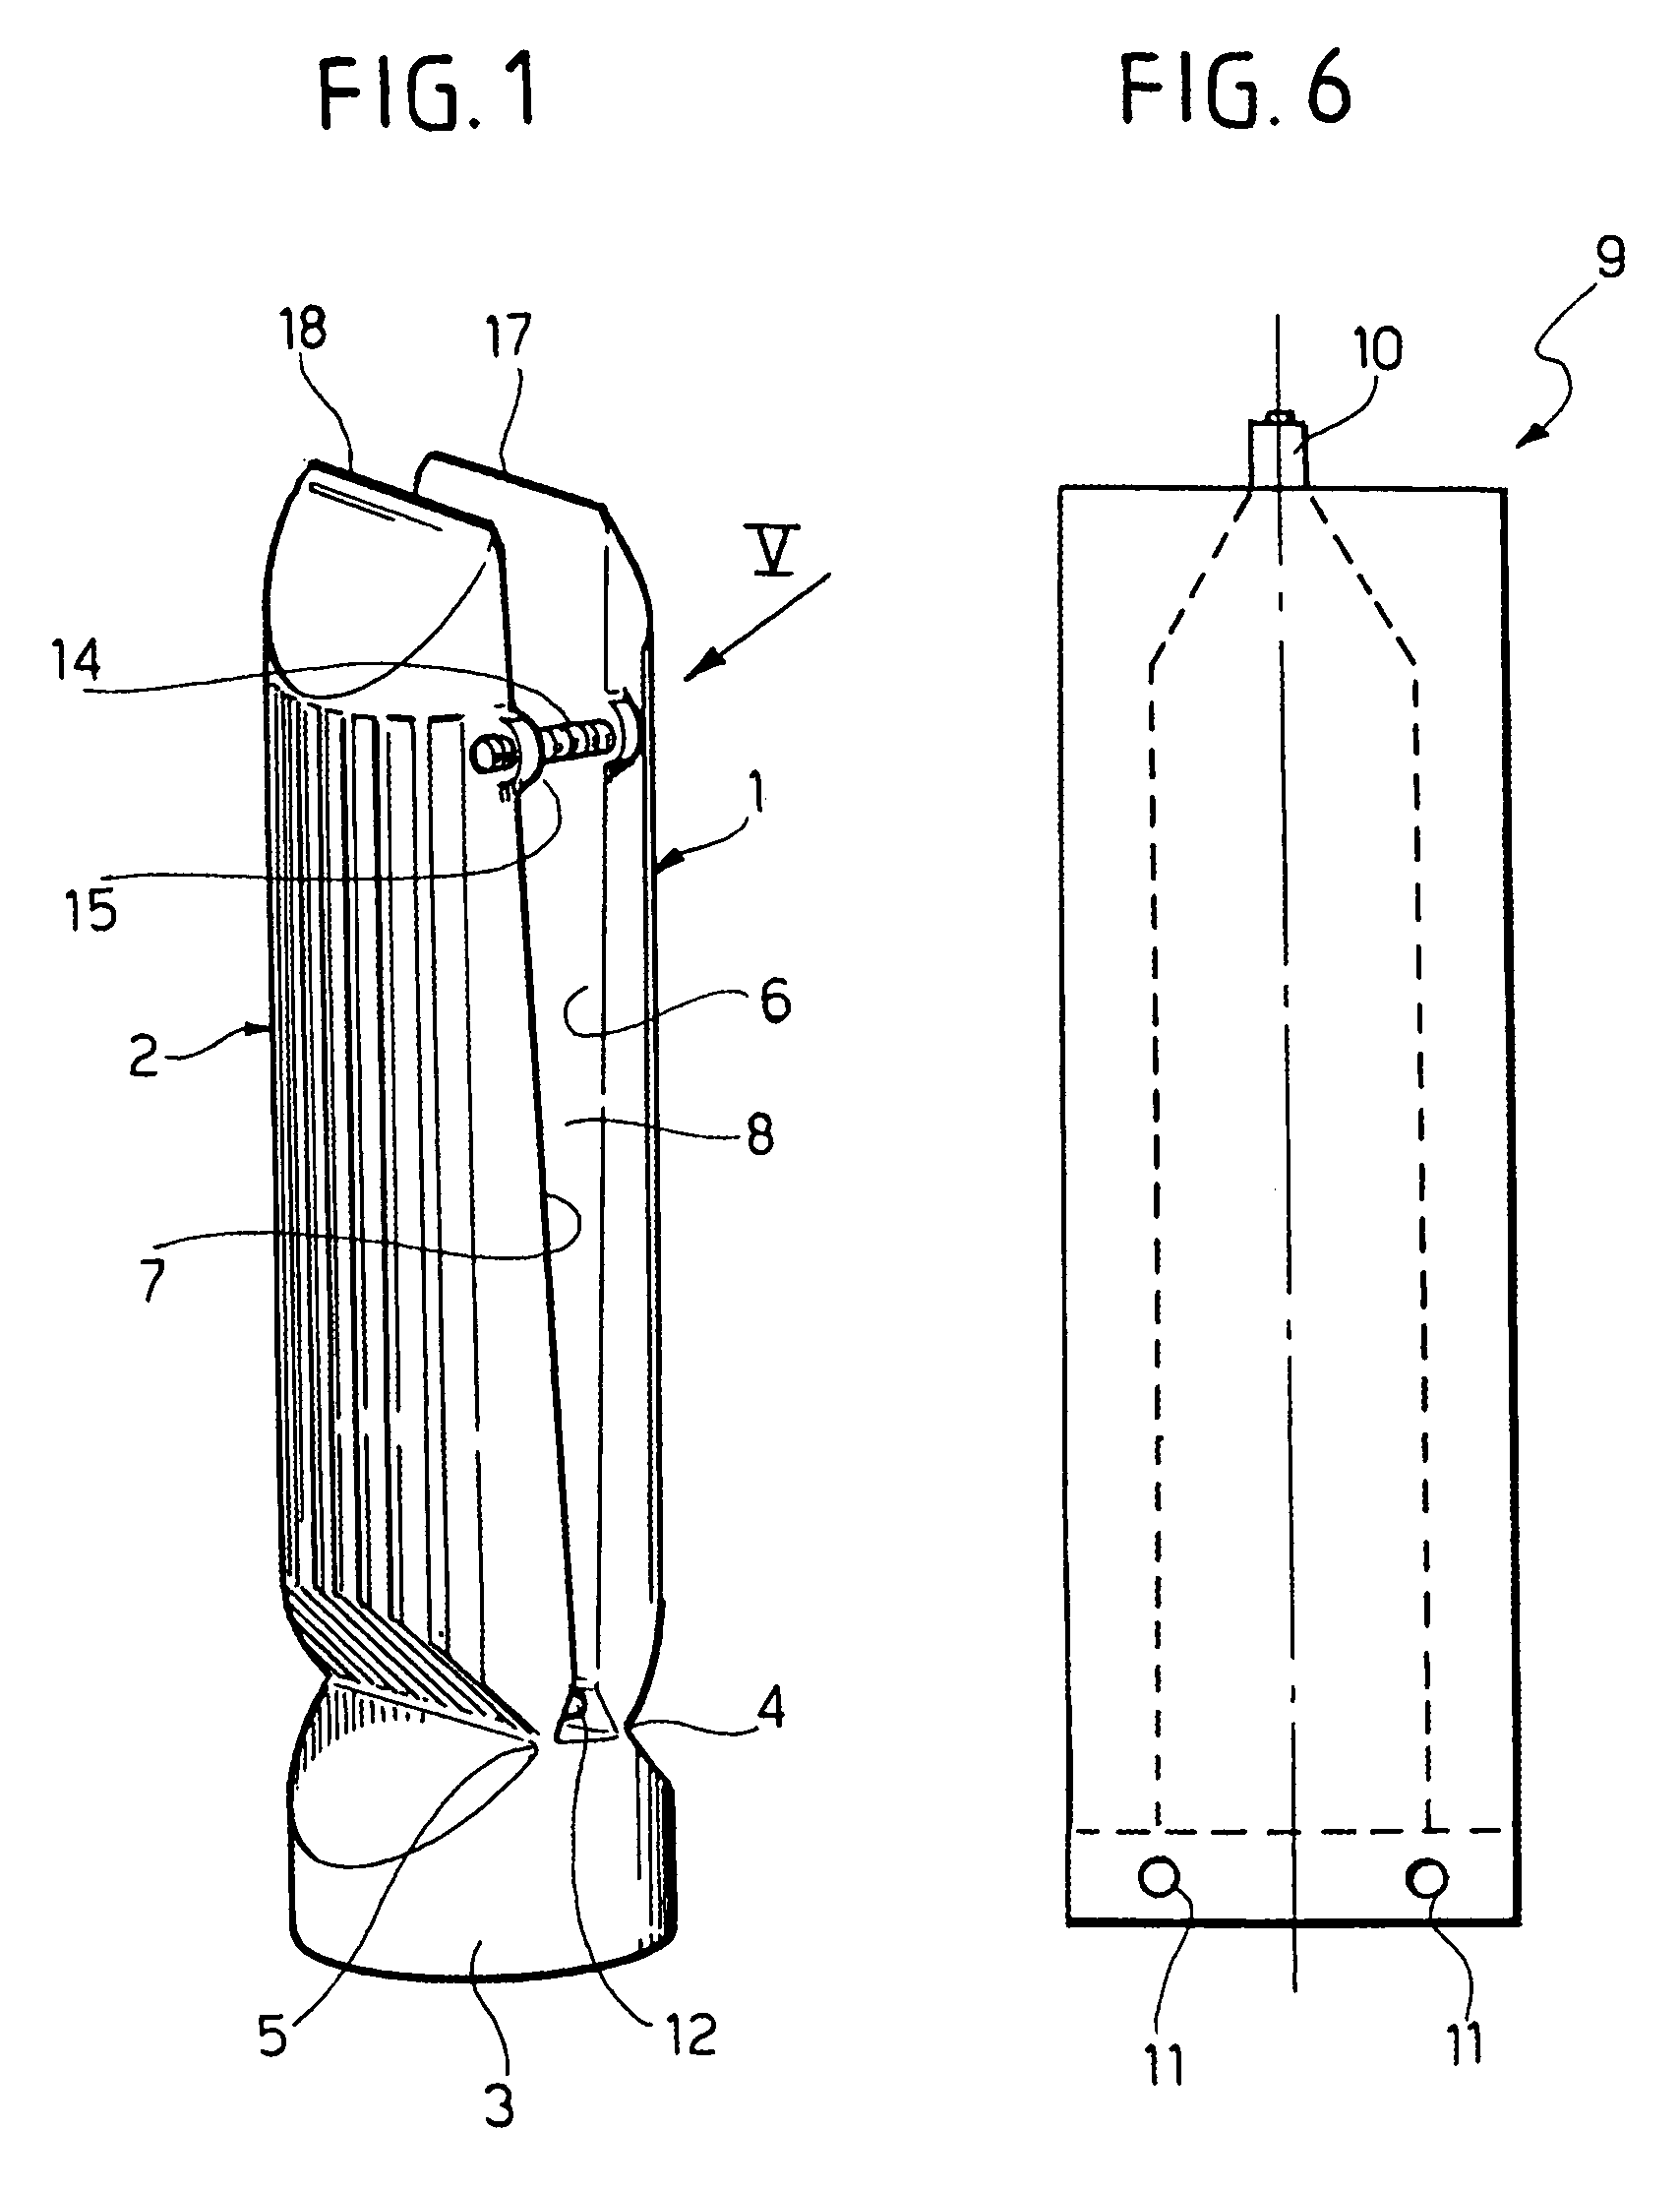 Device for dispensing fluid and semi-dense substances packaged in flexible sealed sachets